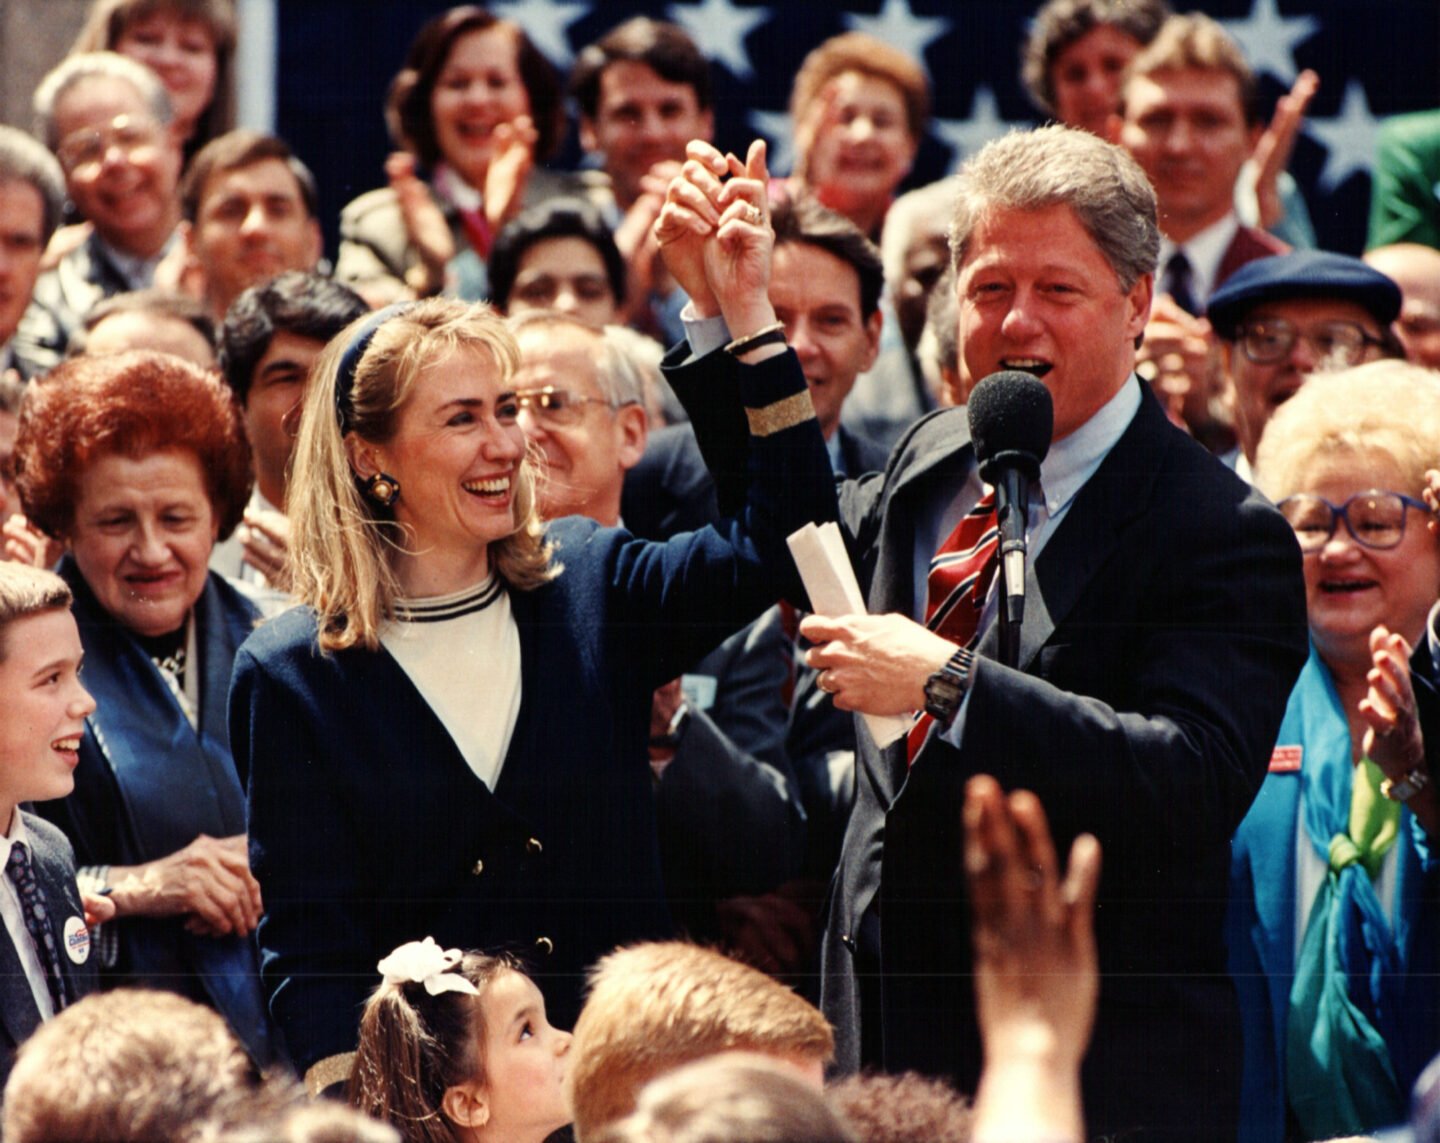 Then-Governor Bill Clinton and Hillary Clinton at a rally.